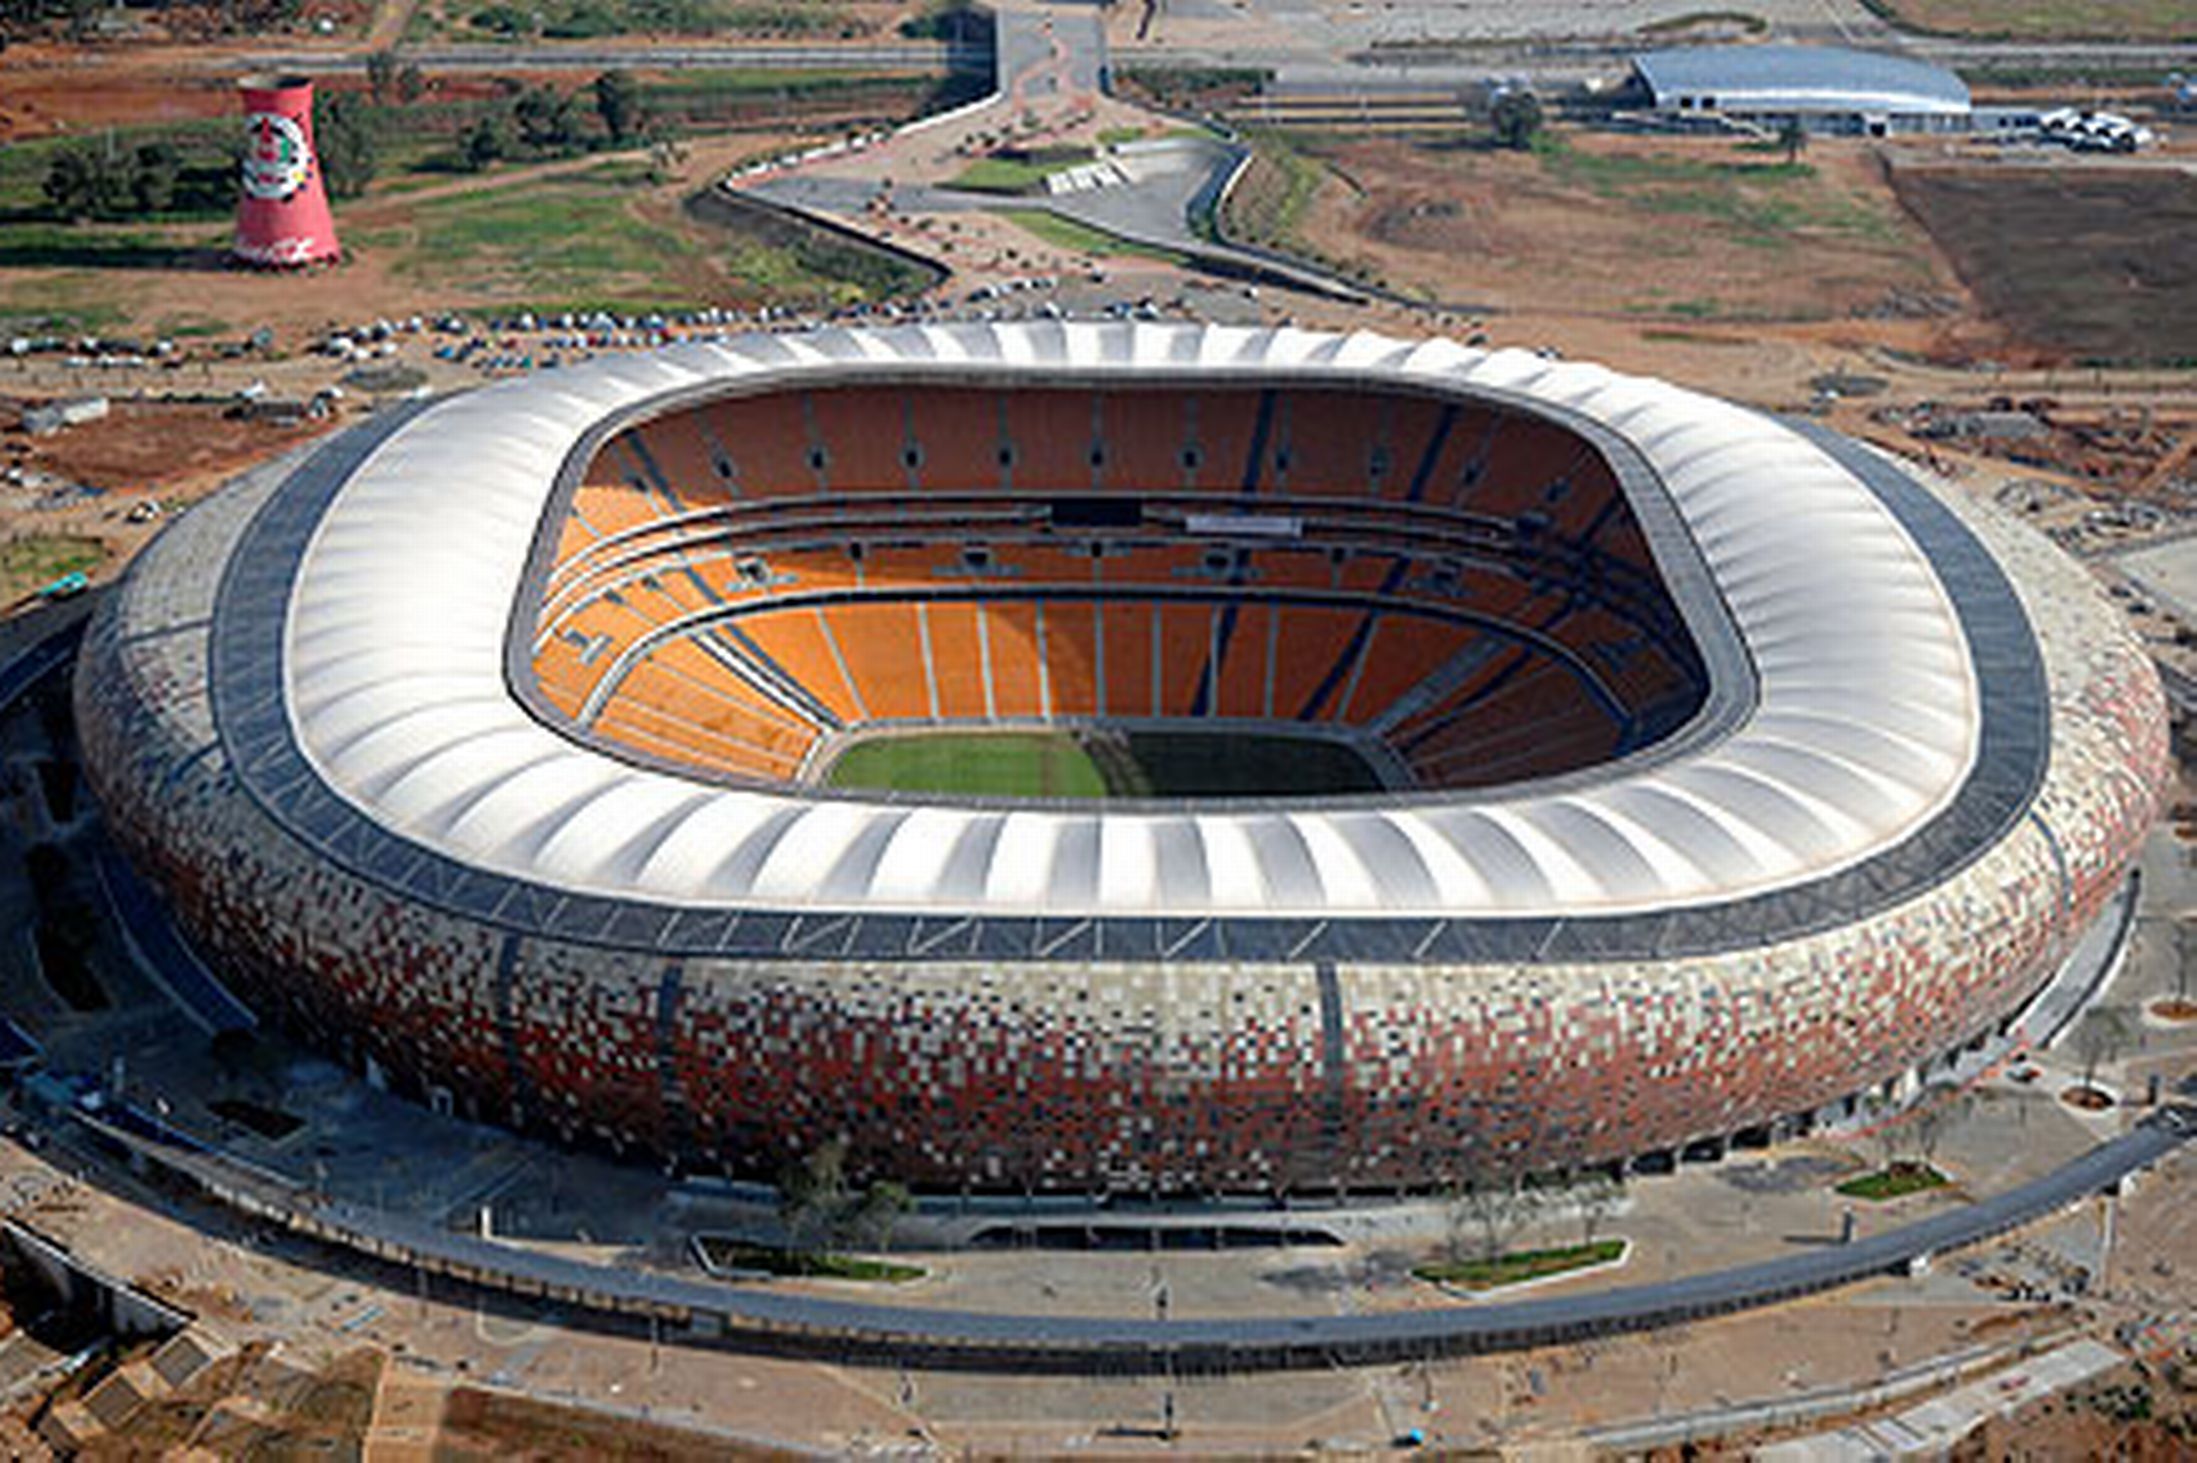 The 5 largest Football Stadiums in the world